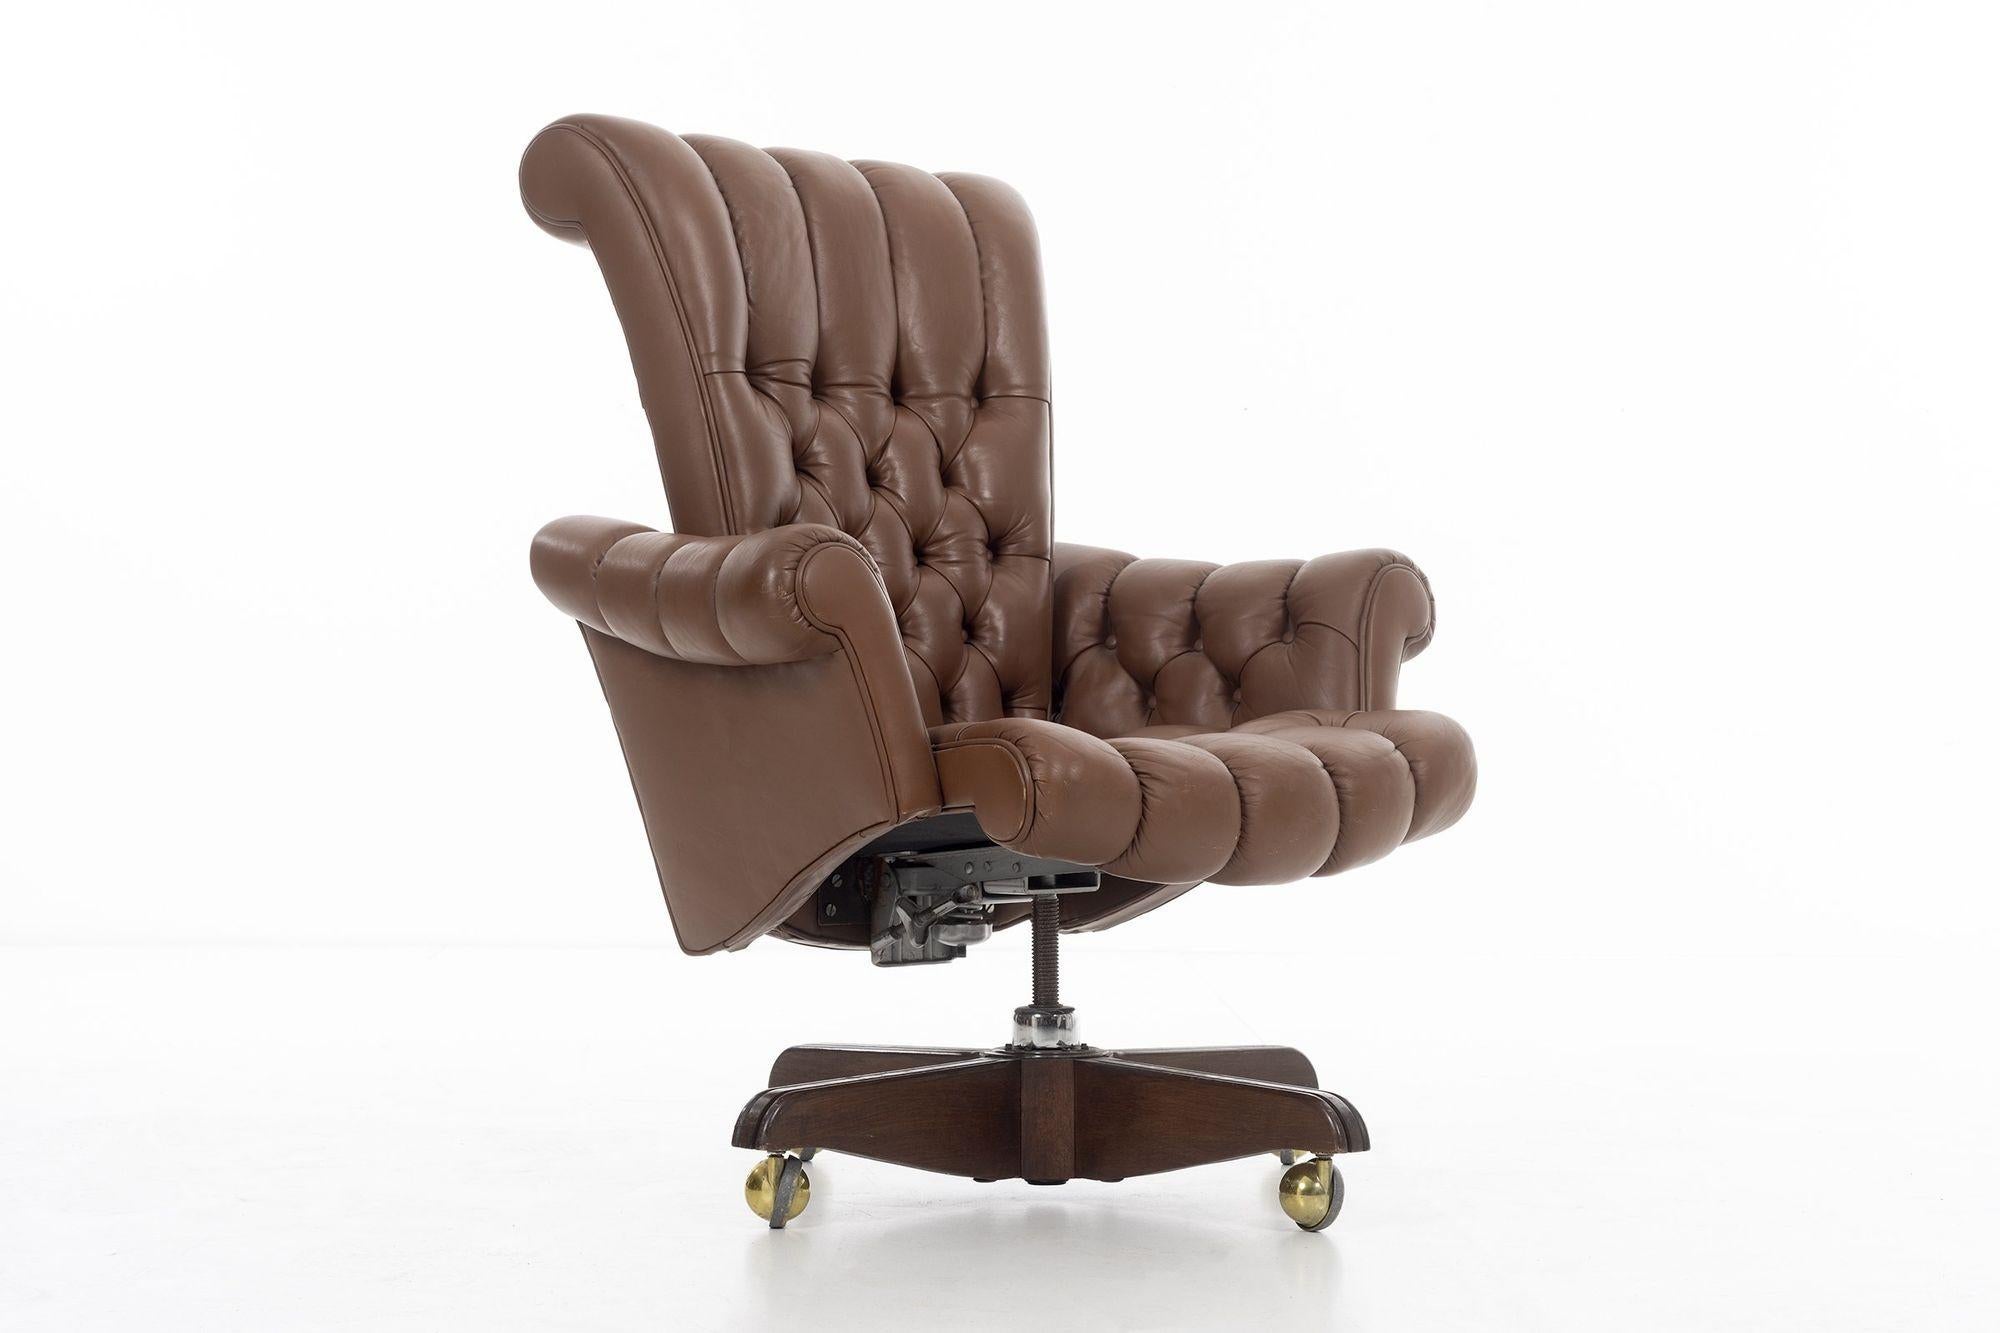 Wormley for Dunbar “In Clover” 932 Executive chair button tufted leather, solid walnut base, brass casters, tilts and swivels with adjustable seat height.







Dunbar

United States

1963

Edward Wormley

Excellent

1

Tufted